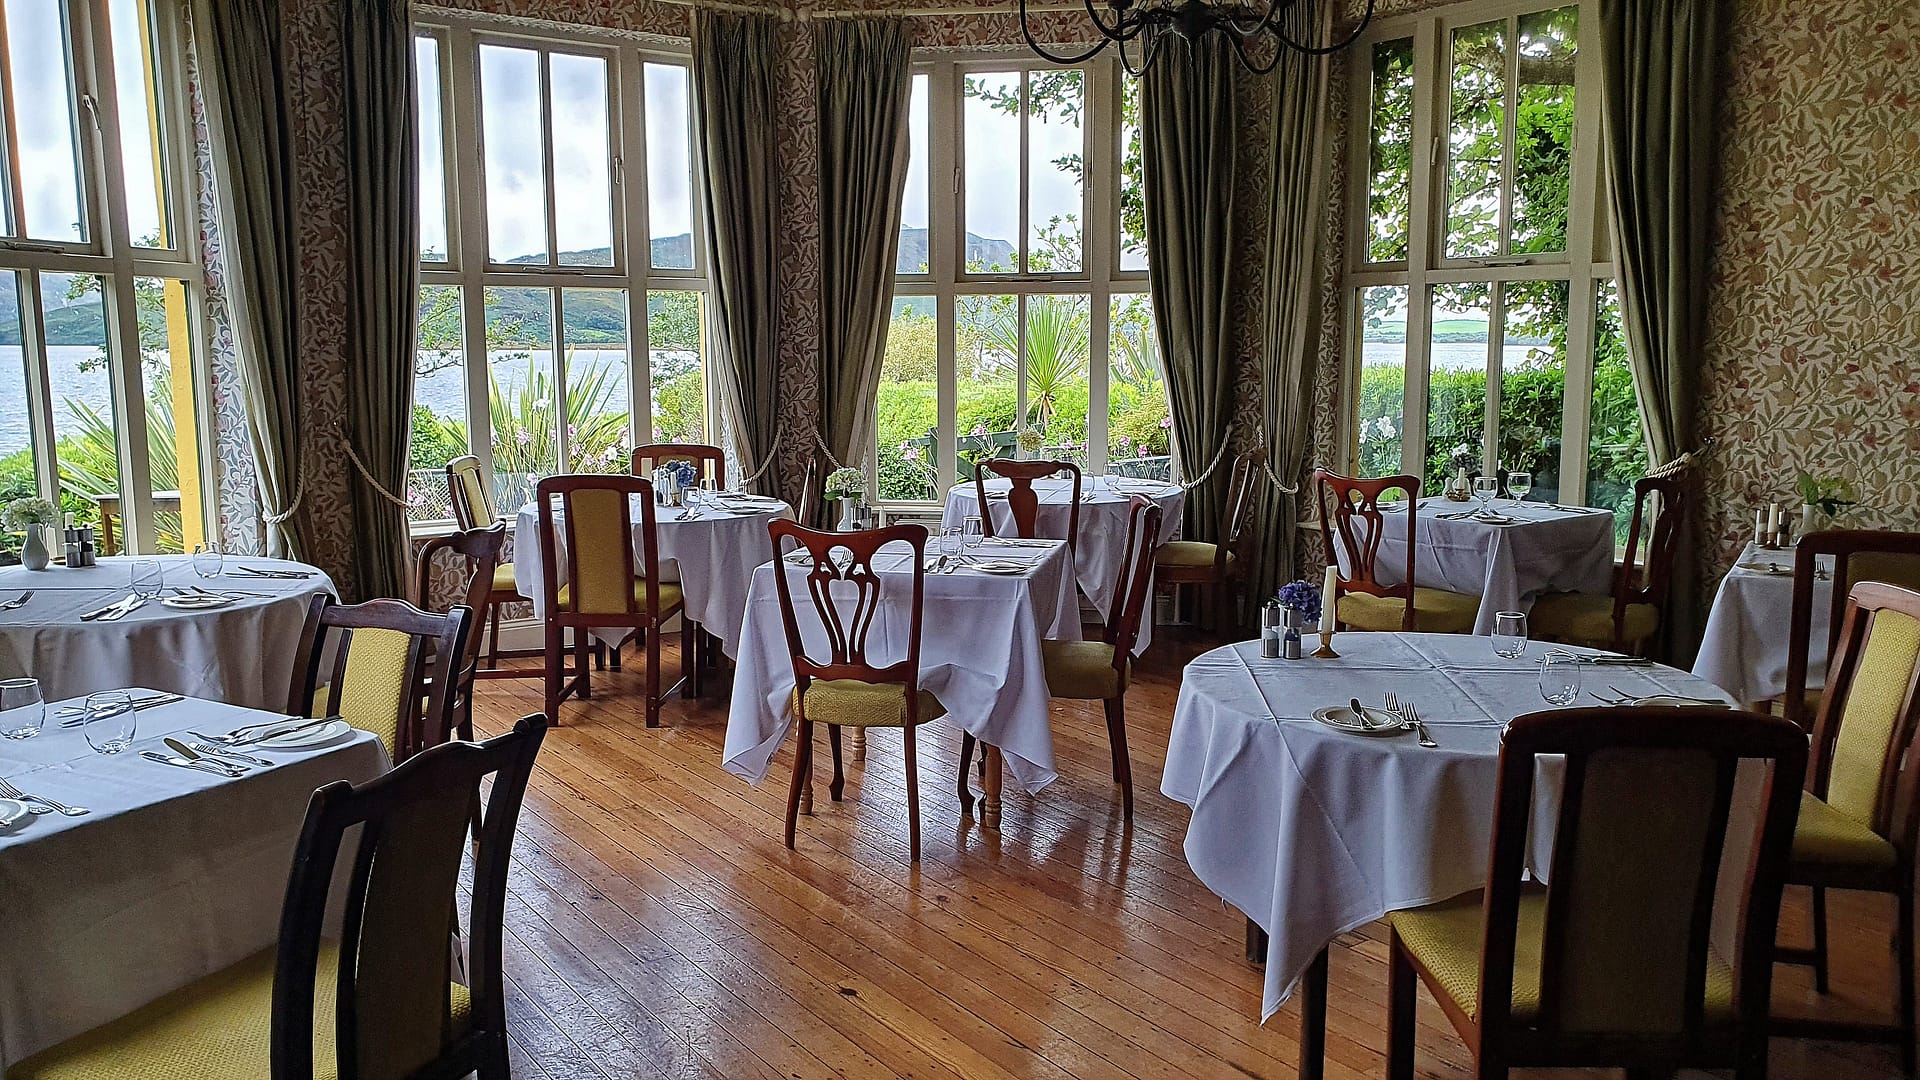 Lake House Restaurant at Carrig Country House